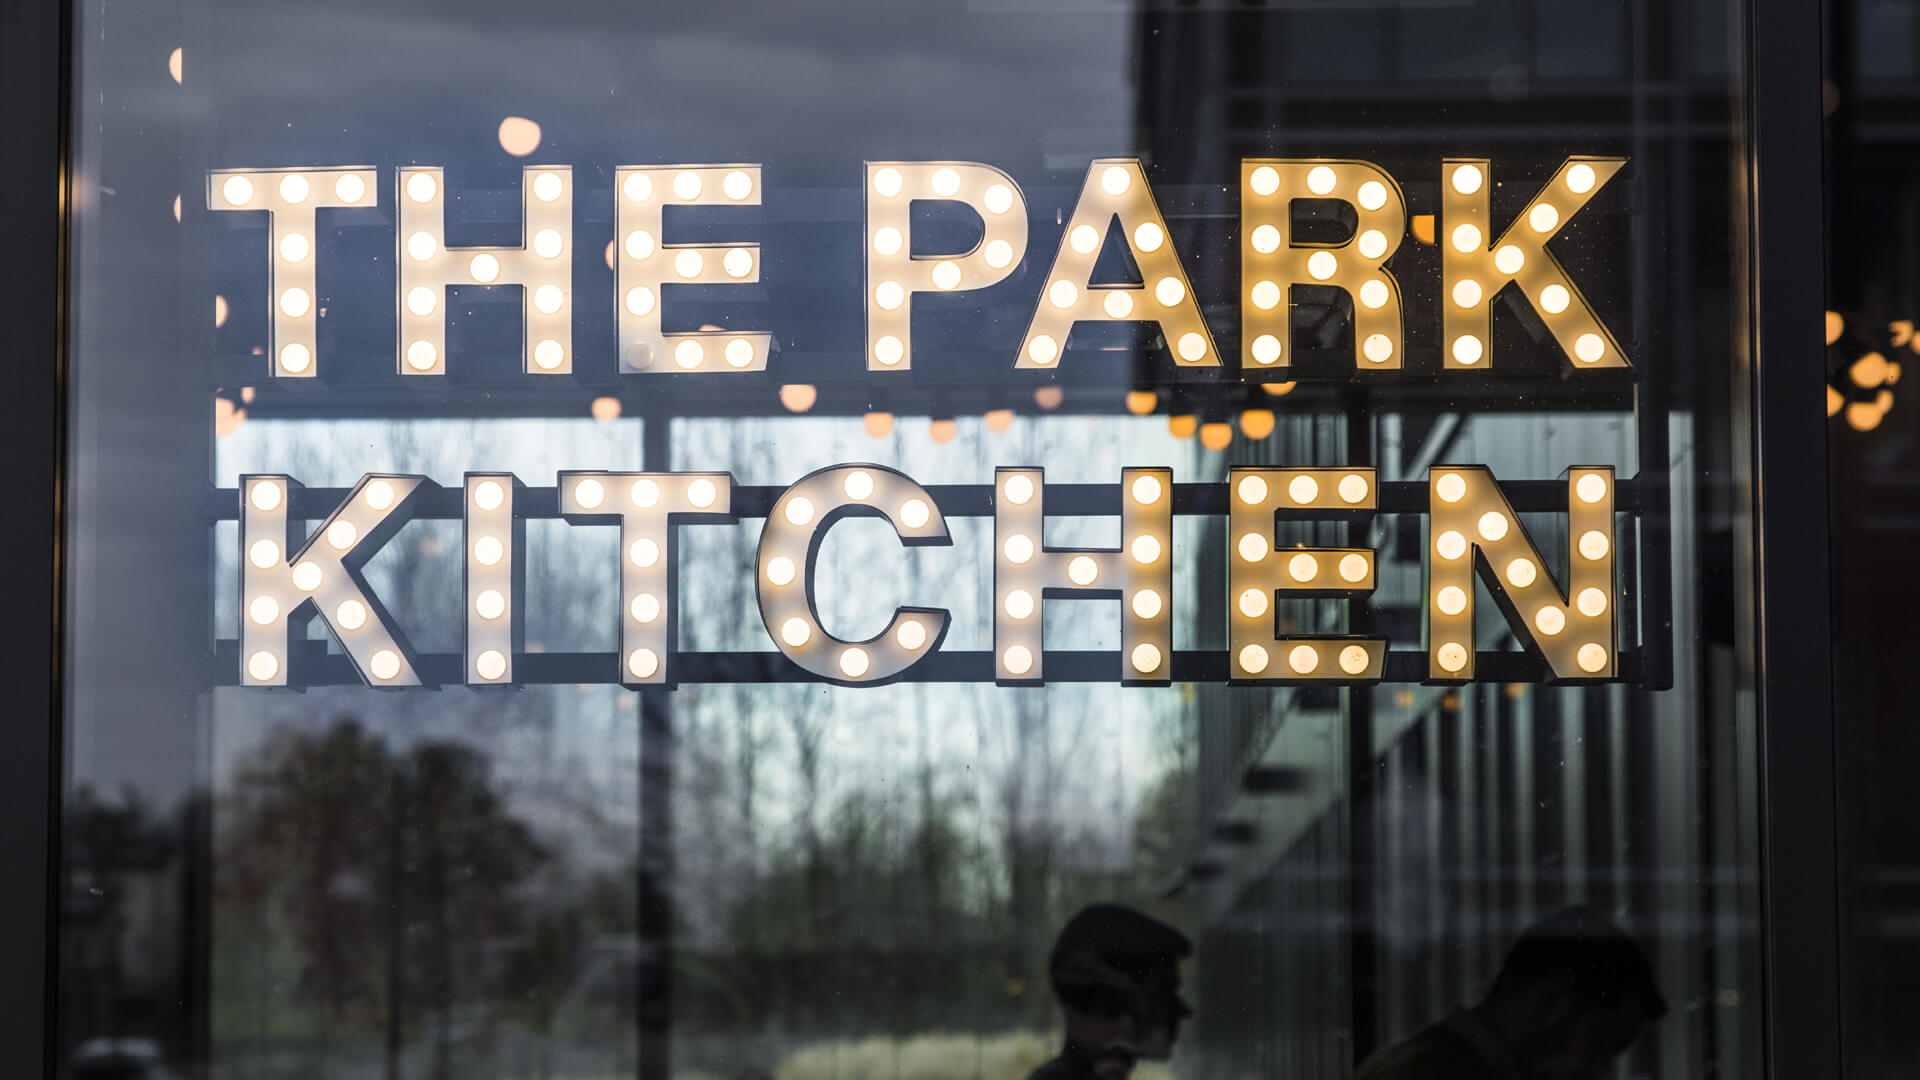 The Park Kitchen - The Park Kitchen - small letters with bulbs placed behind the glass